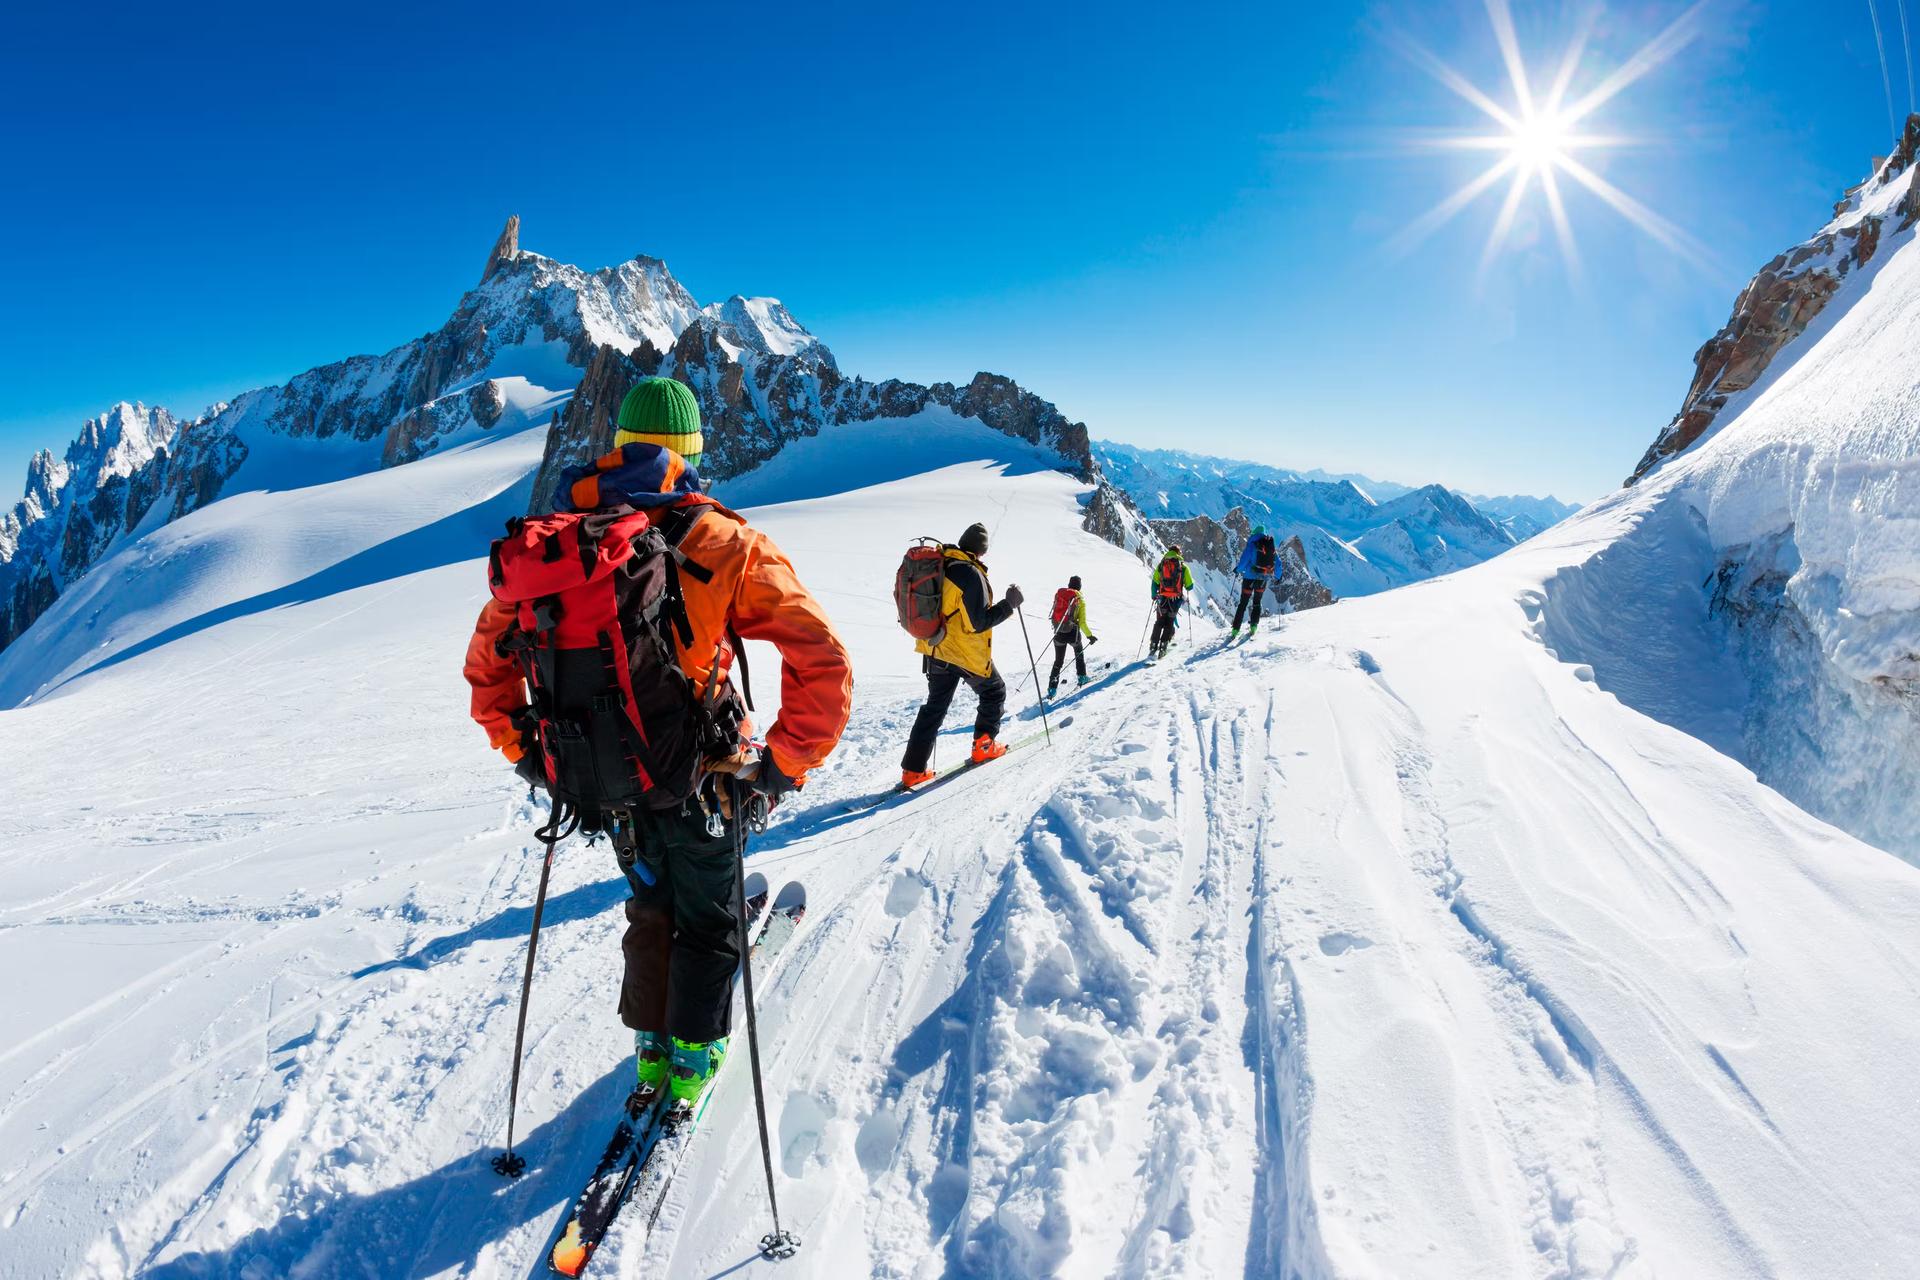 A group of skiers start the descent of Valle Blanche, the most famous off-piste run in the Alps